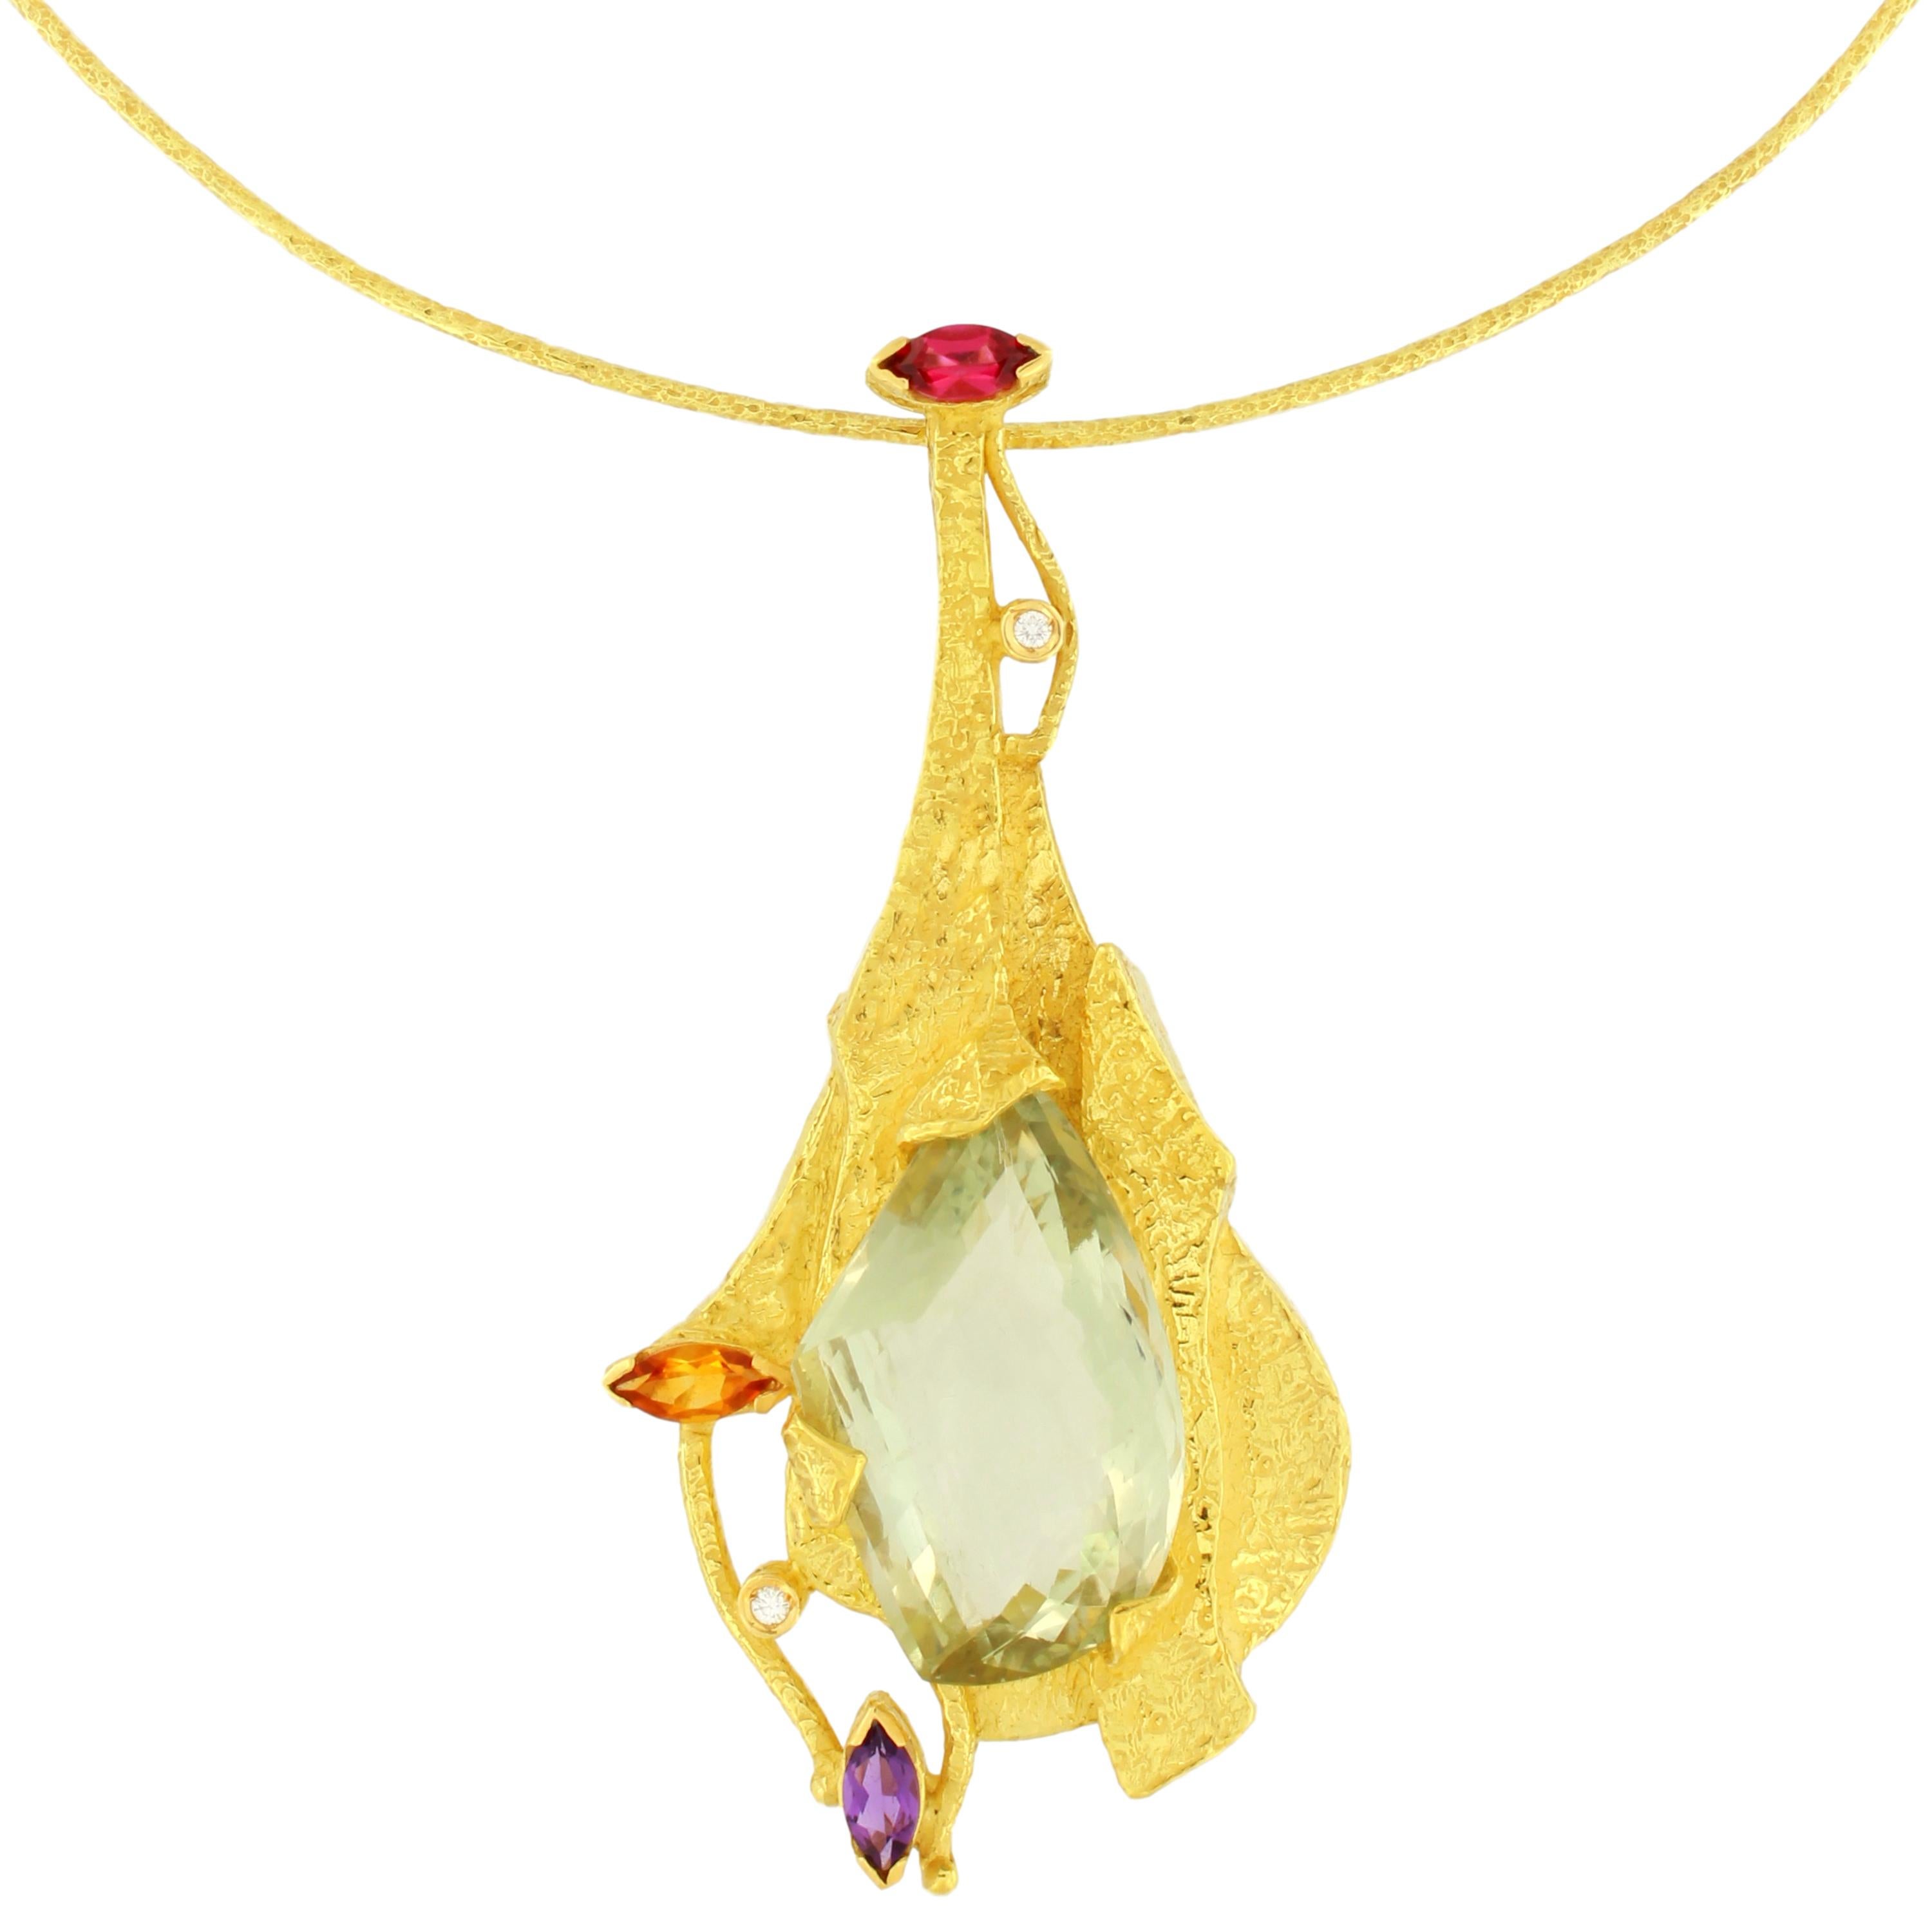 Exquisite Satin Yellow Gold Pendant Necklace embellished with Multi-Color Precious Gemstones, from Sacchi’s “Burlesque” Collection, hand-crafted with lost-wax casting technique.

Lost-wax casting, one of the oldest techniques for creating jewelry,